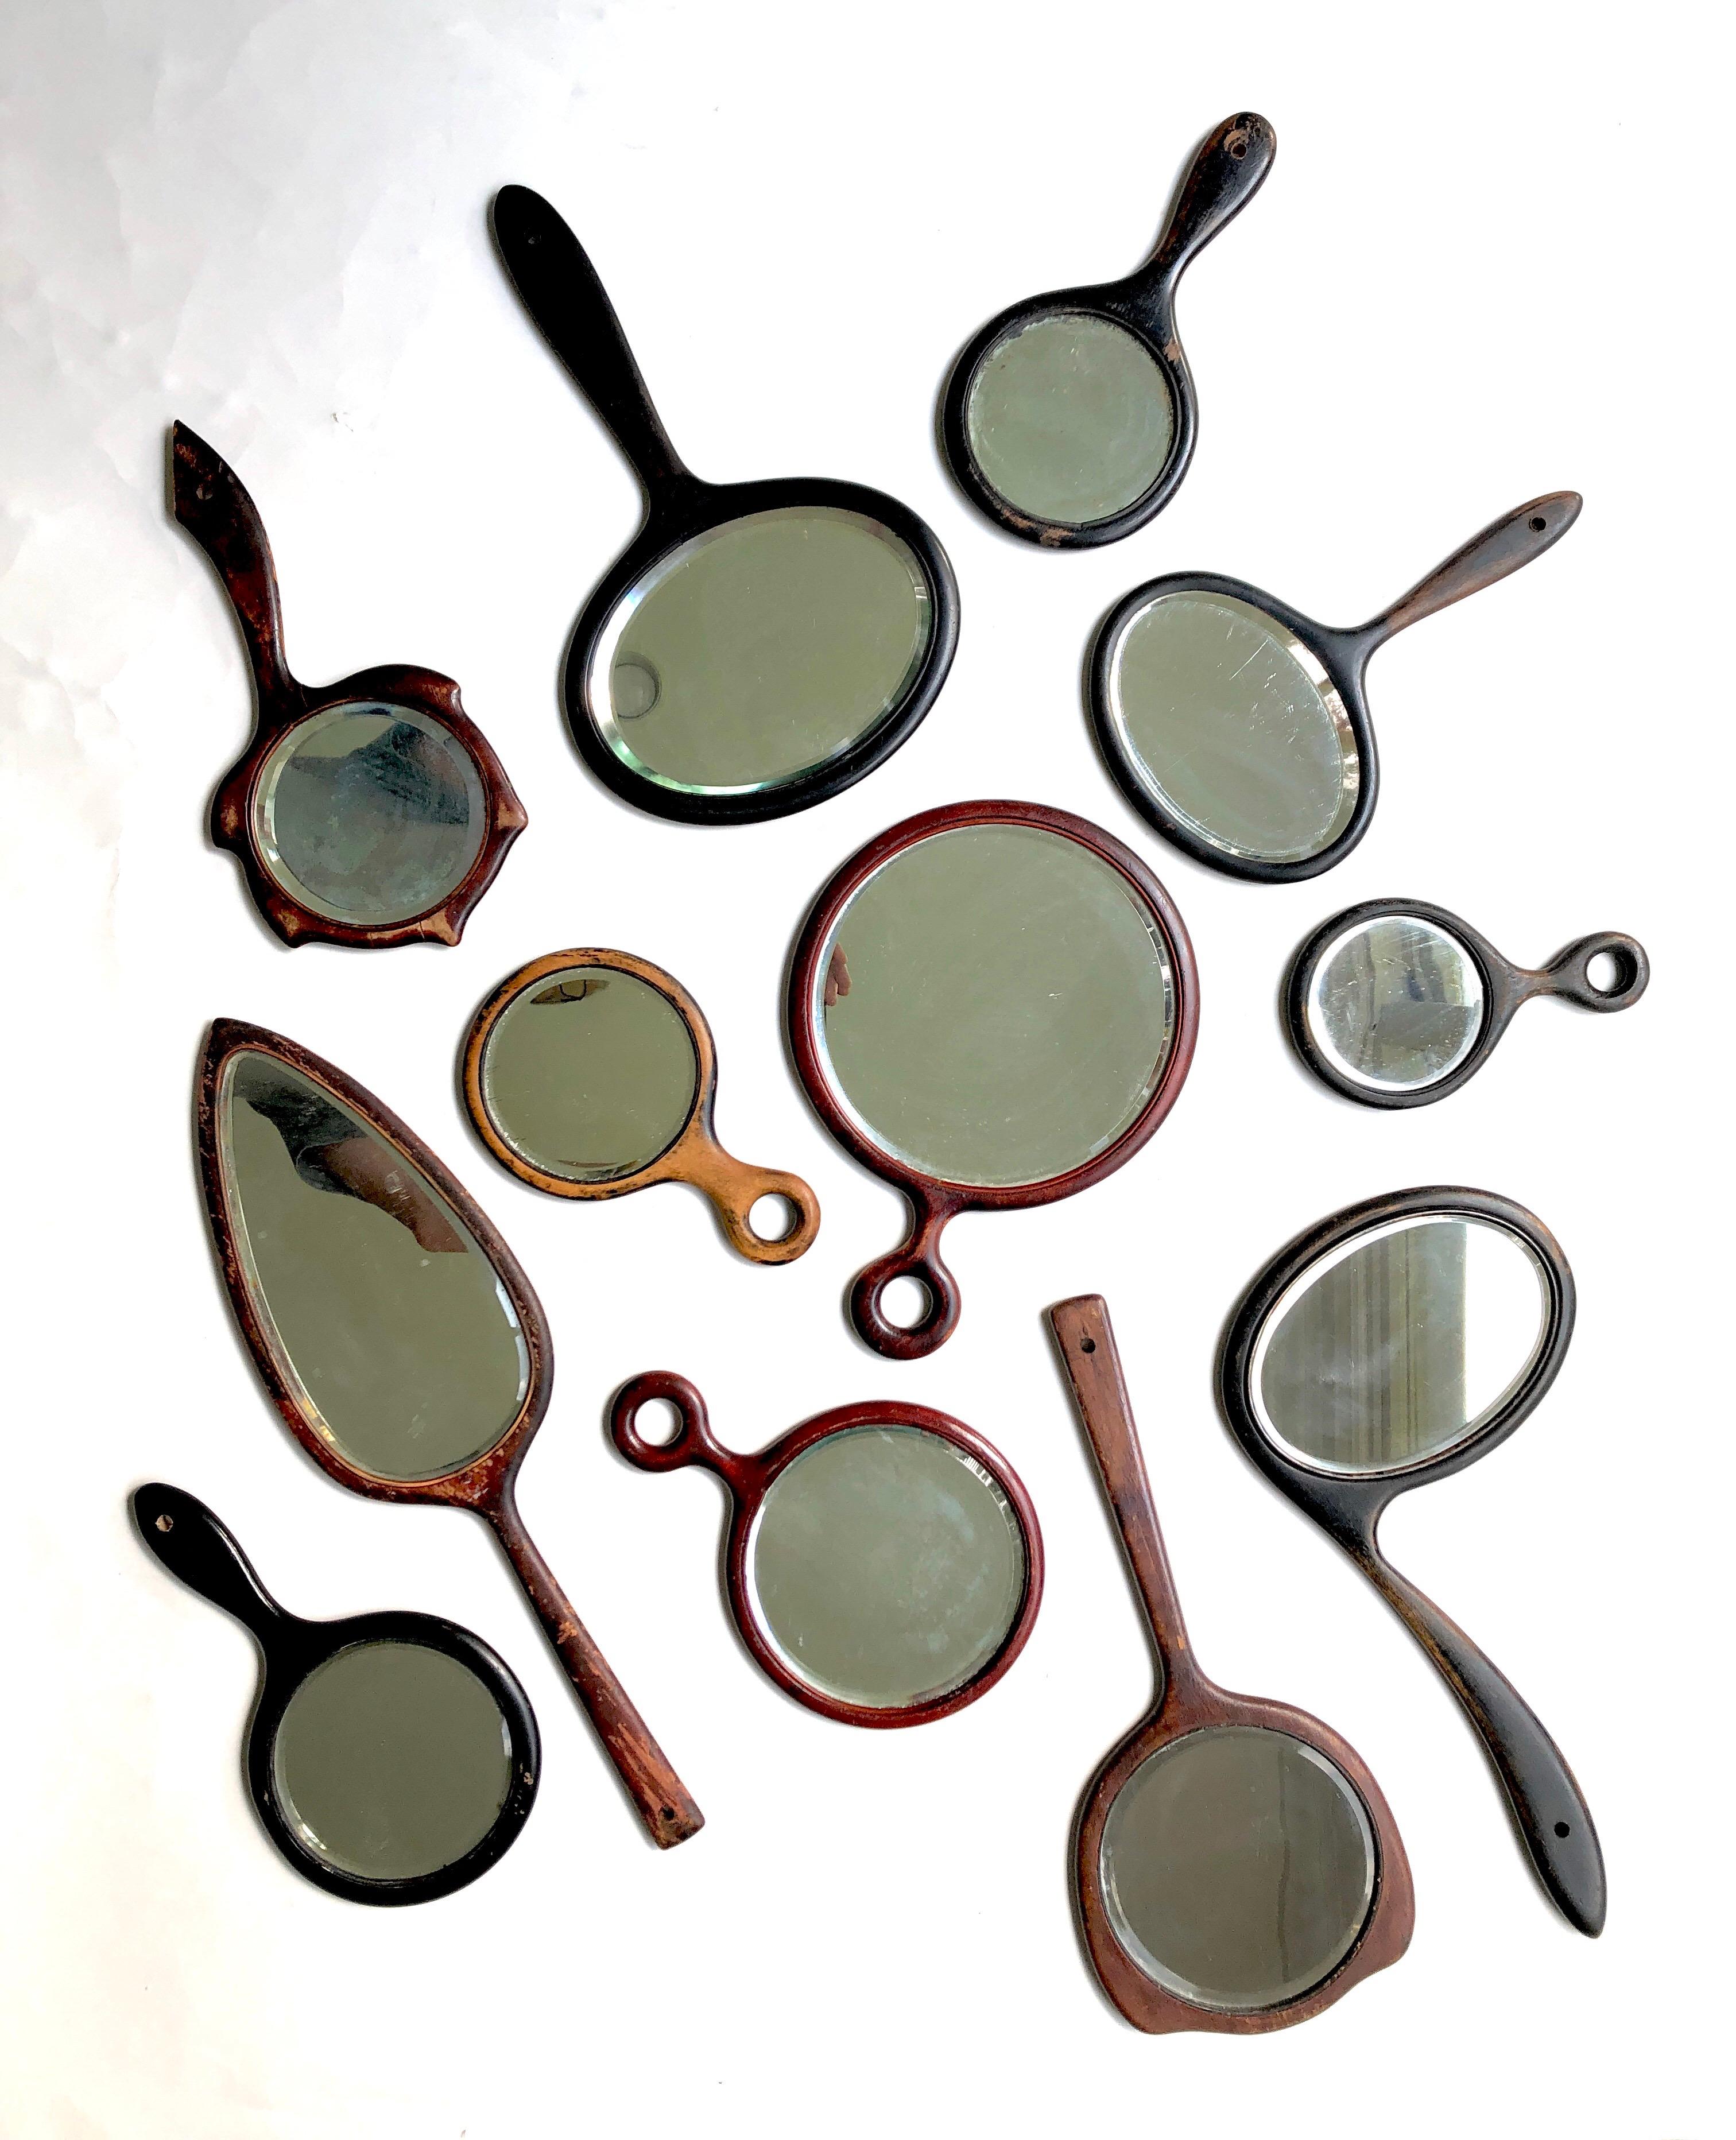 A collection of 12 antique beveled glass wooden hand mirrors in various shapes, colors and sizes. The ebony ones are most likely from England. Endless display possibilities. The smallest being 4.5